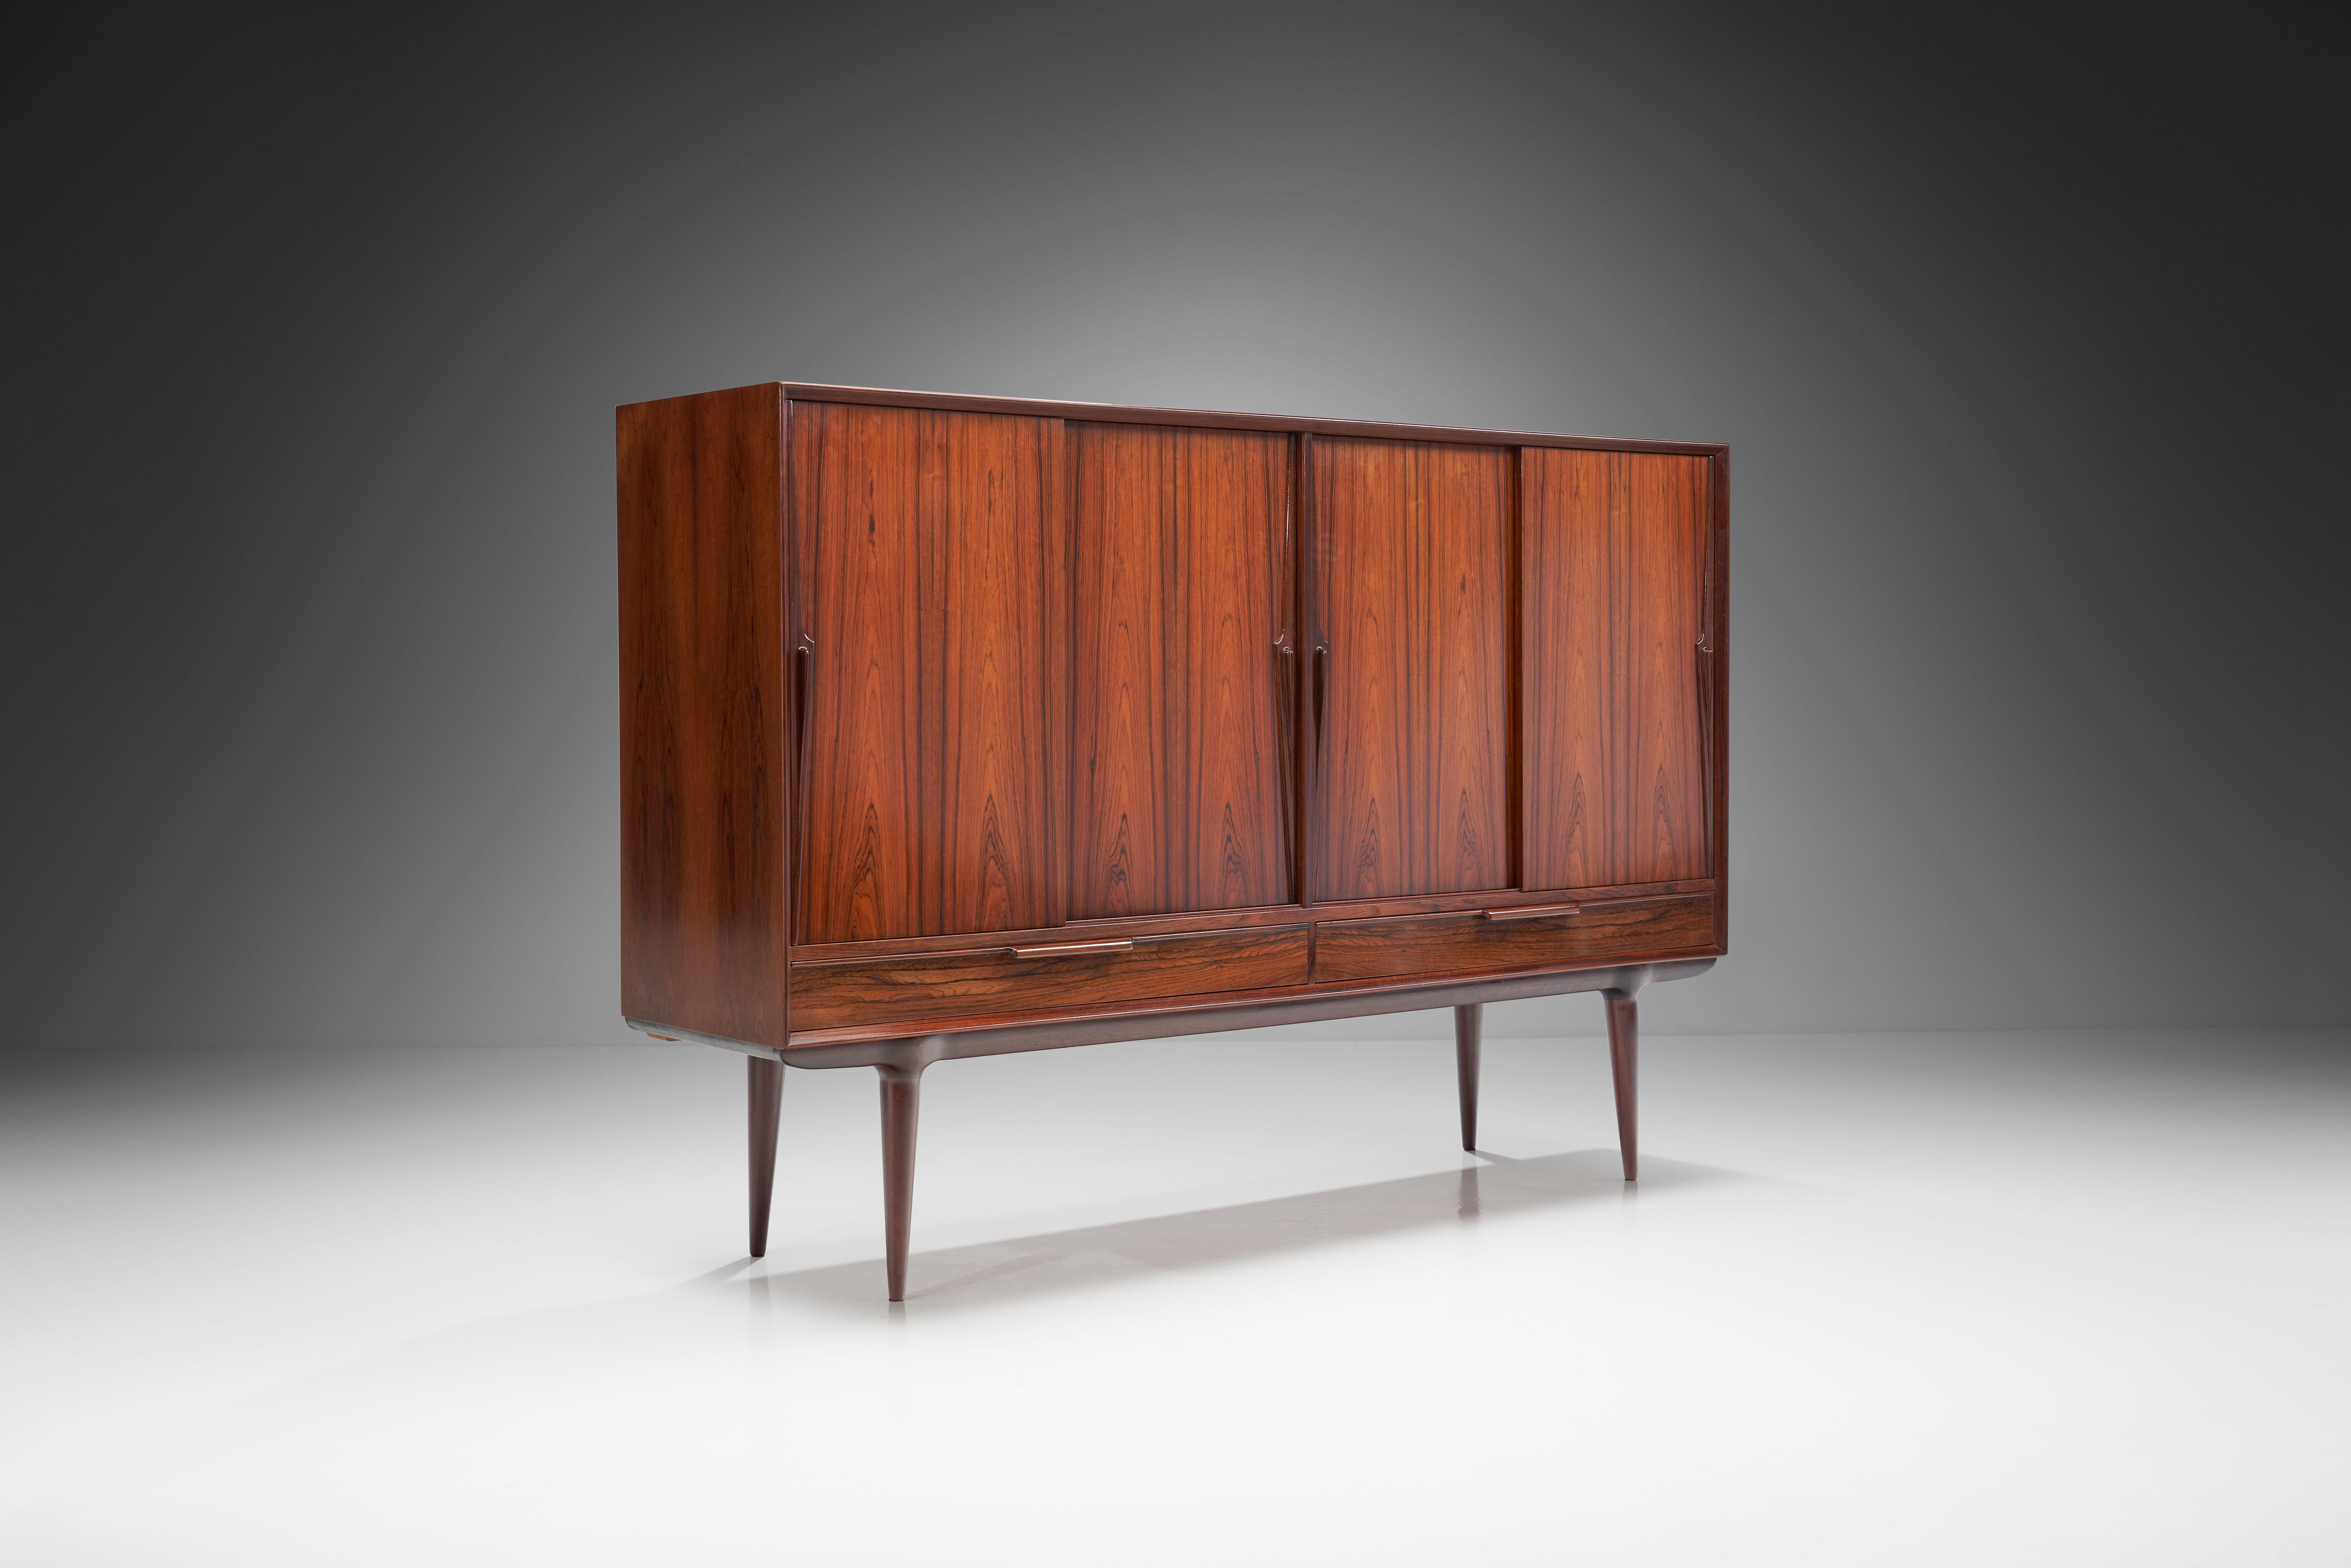 This solid wood sideboard was designed for Omann Jun Møbelfabrik in the mid-20th century. Quality materials and great attention to detail make this “Model 13” sideboard a beautifully constructed, elegant piece. 

The front has two drawers in the